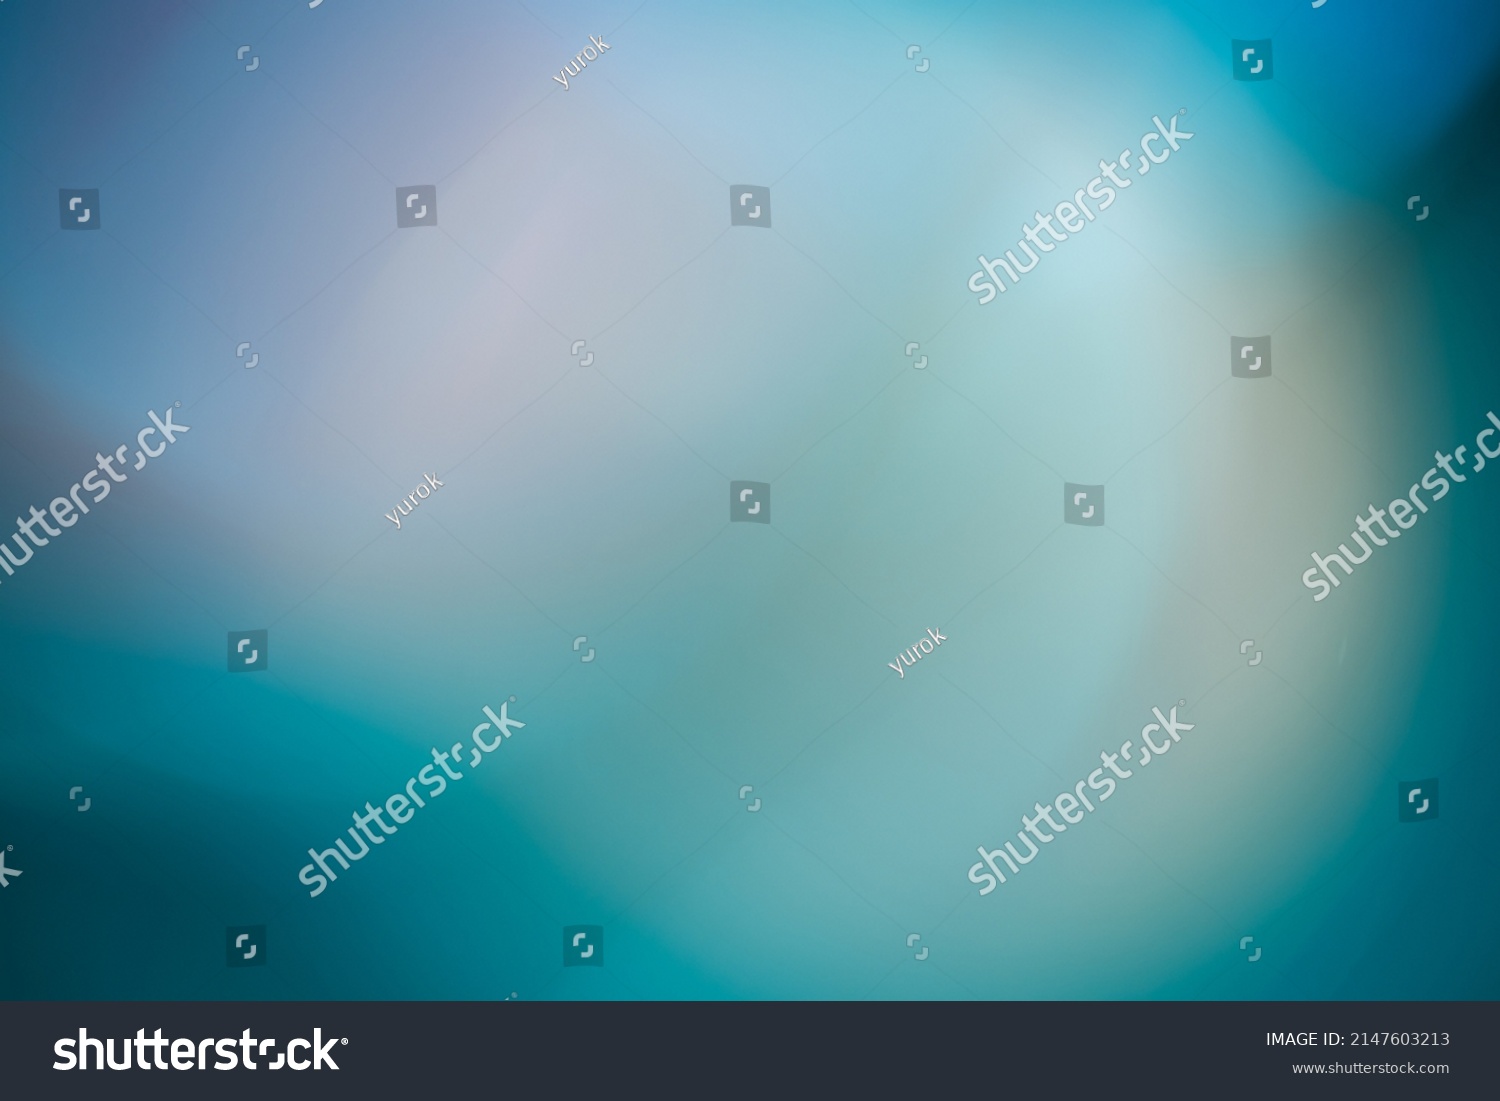 unusual colorful abstract background, design element #2147603213